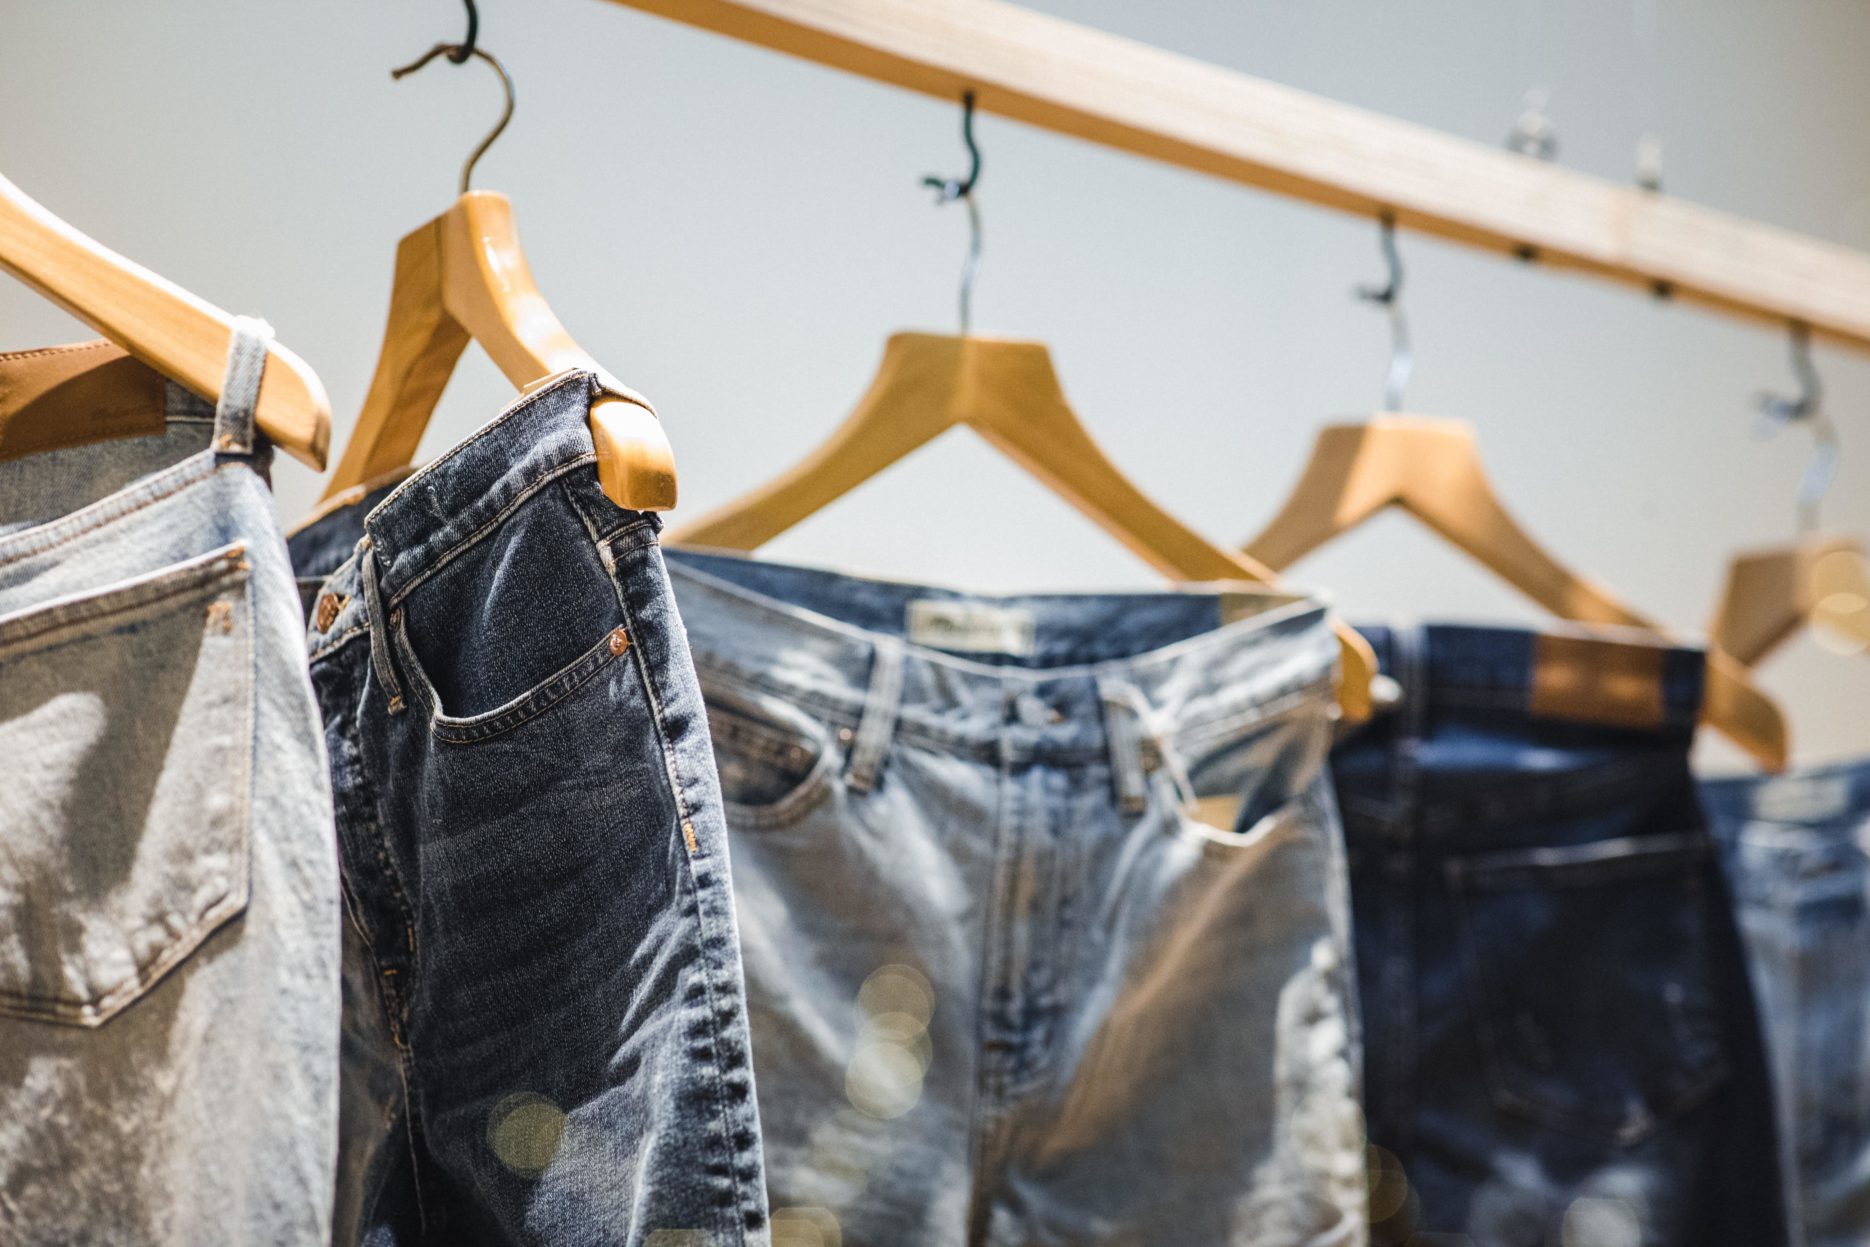 Jeans hanging up on a rack